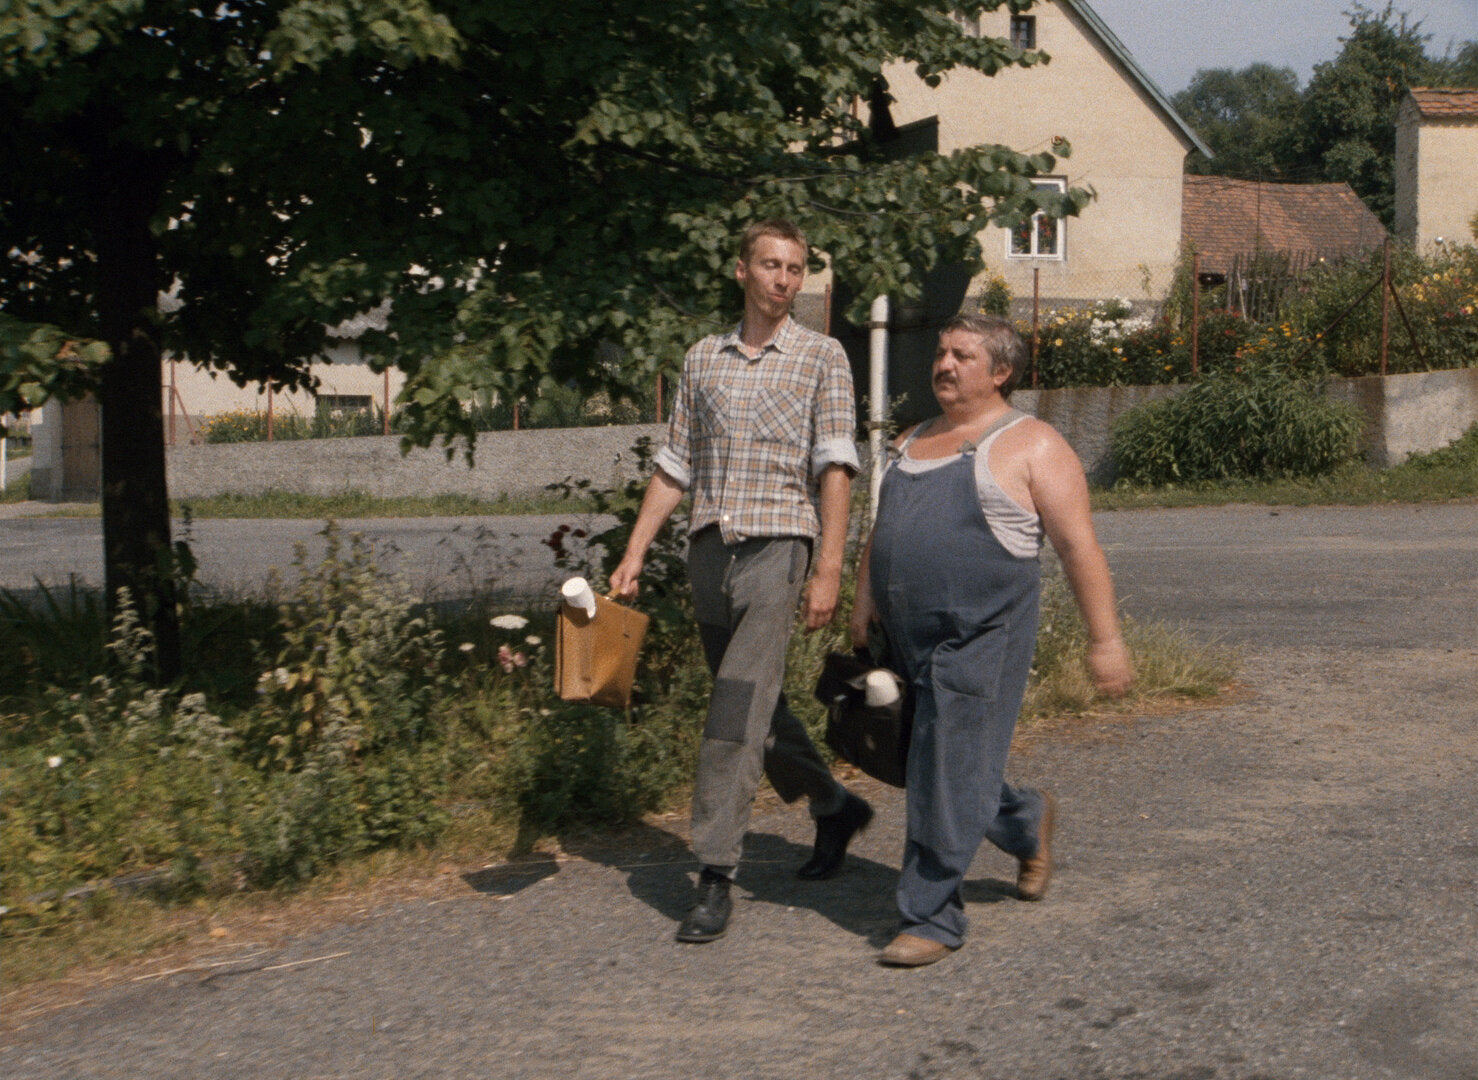 My Sweet Little Village: A Czech Cinematic Gem Now Available on Blu-Ray with English Subtitles